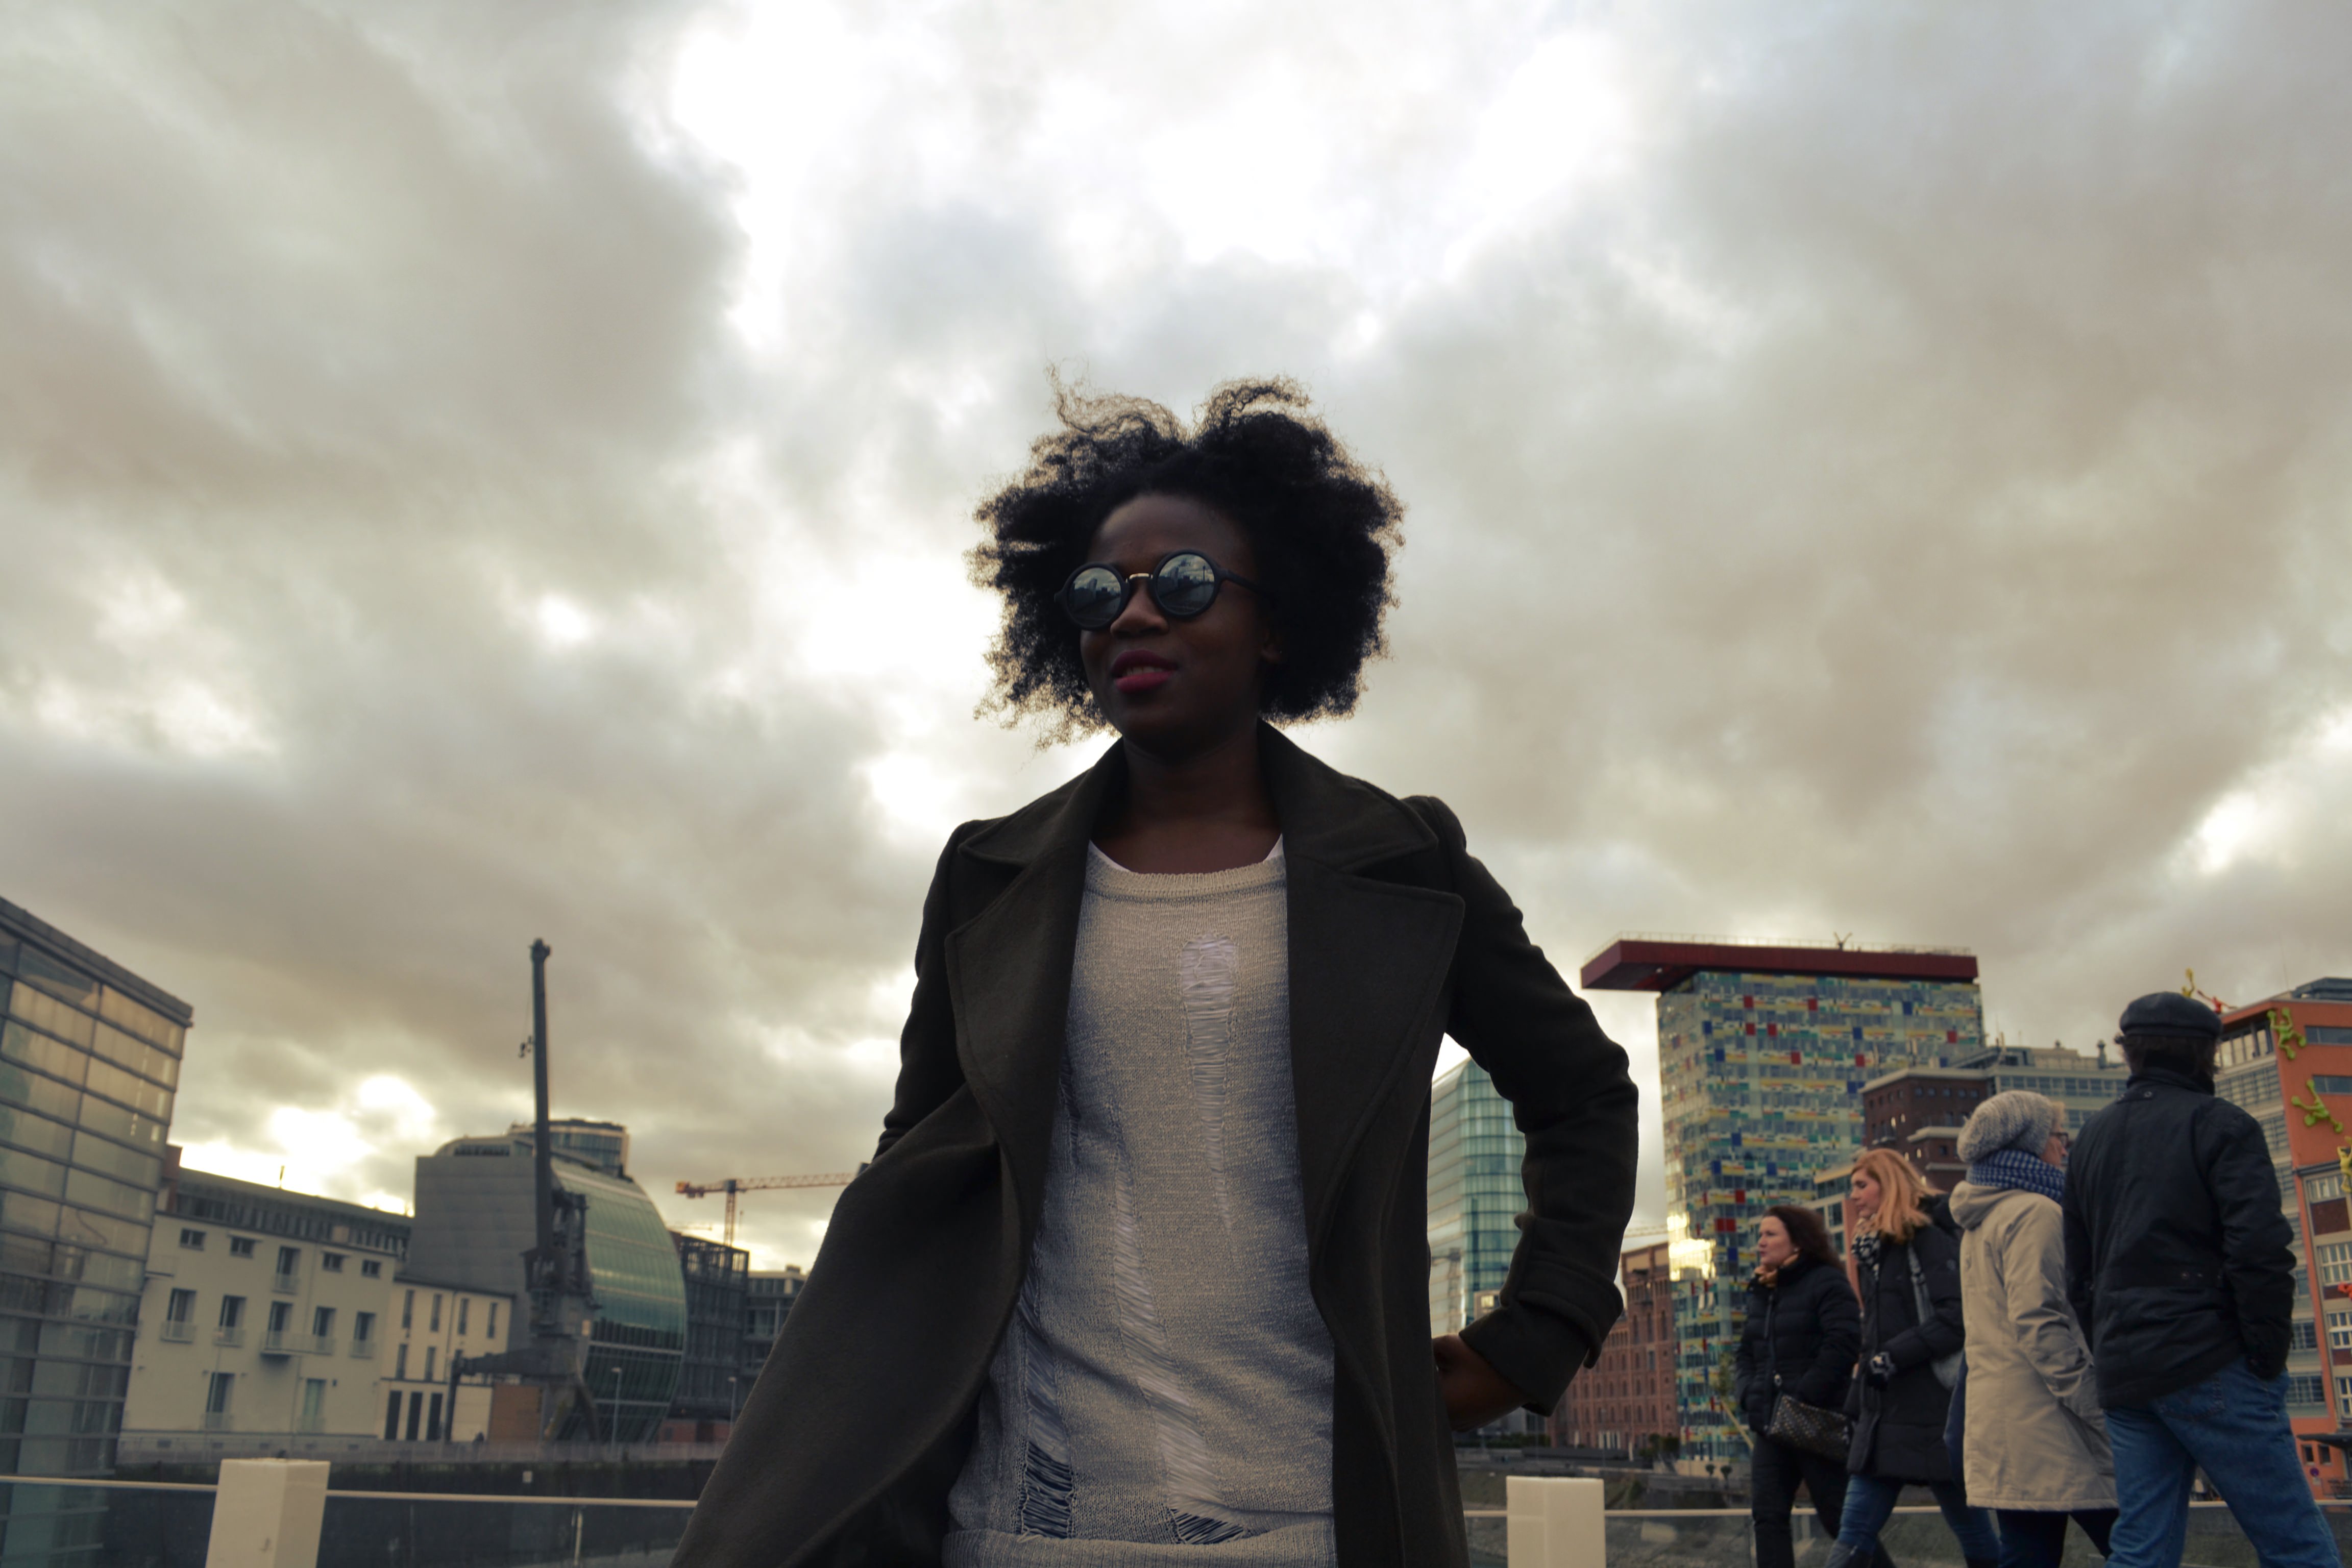 A woman stands in front of a cloudy sky with people walking in the background.